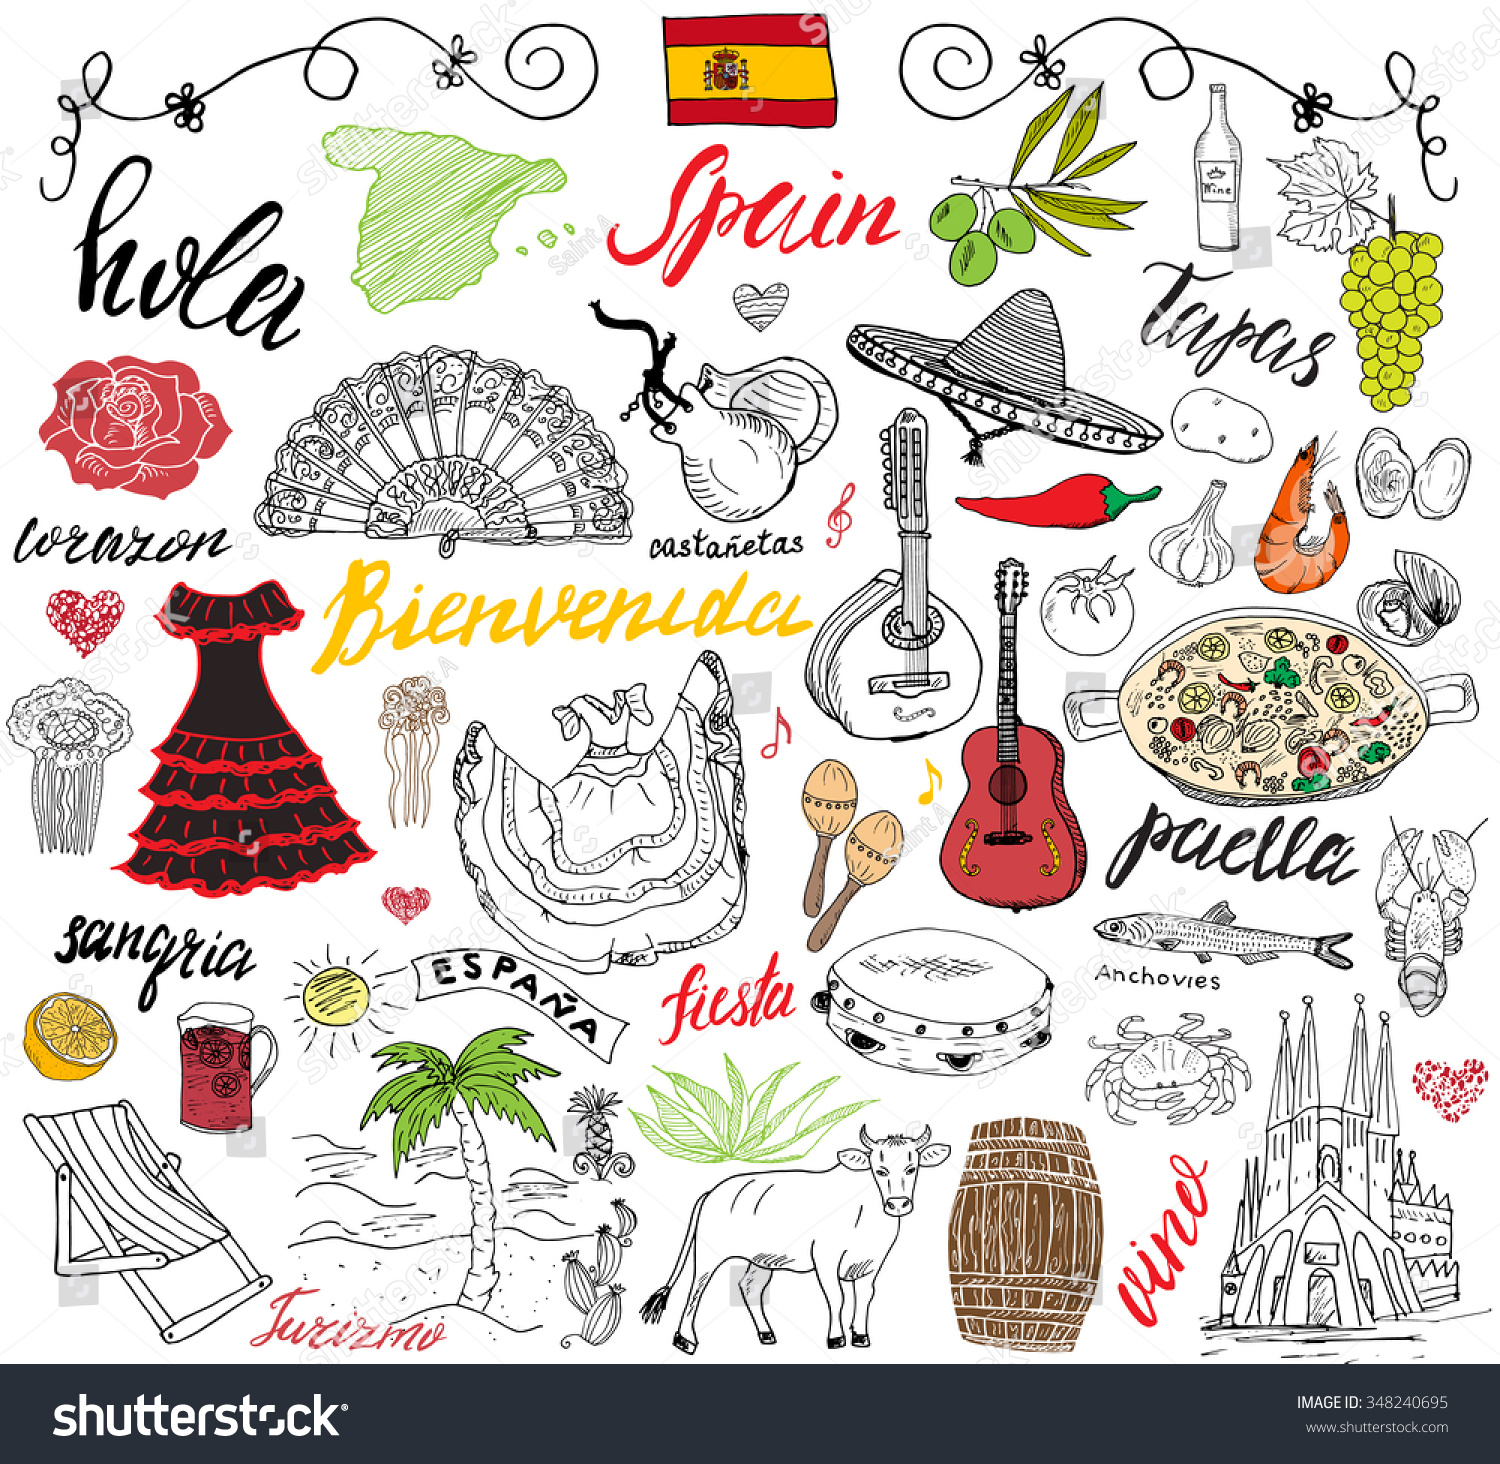 clipart map of spain - photo #48